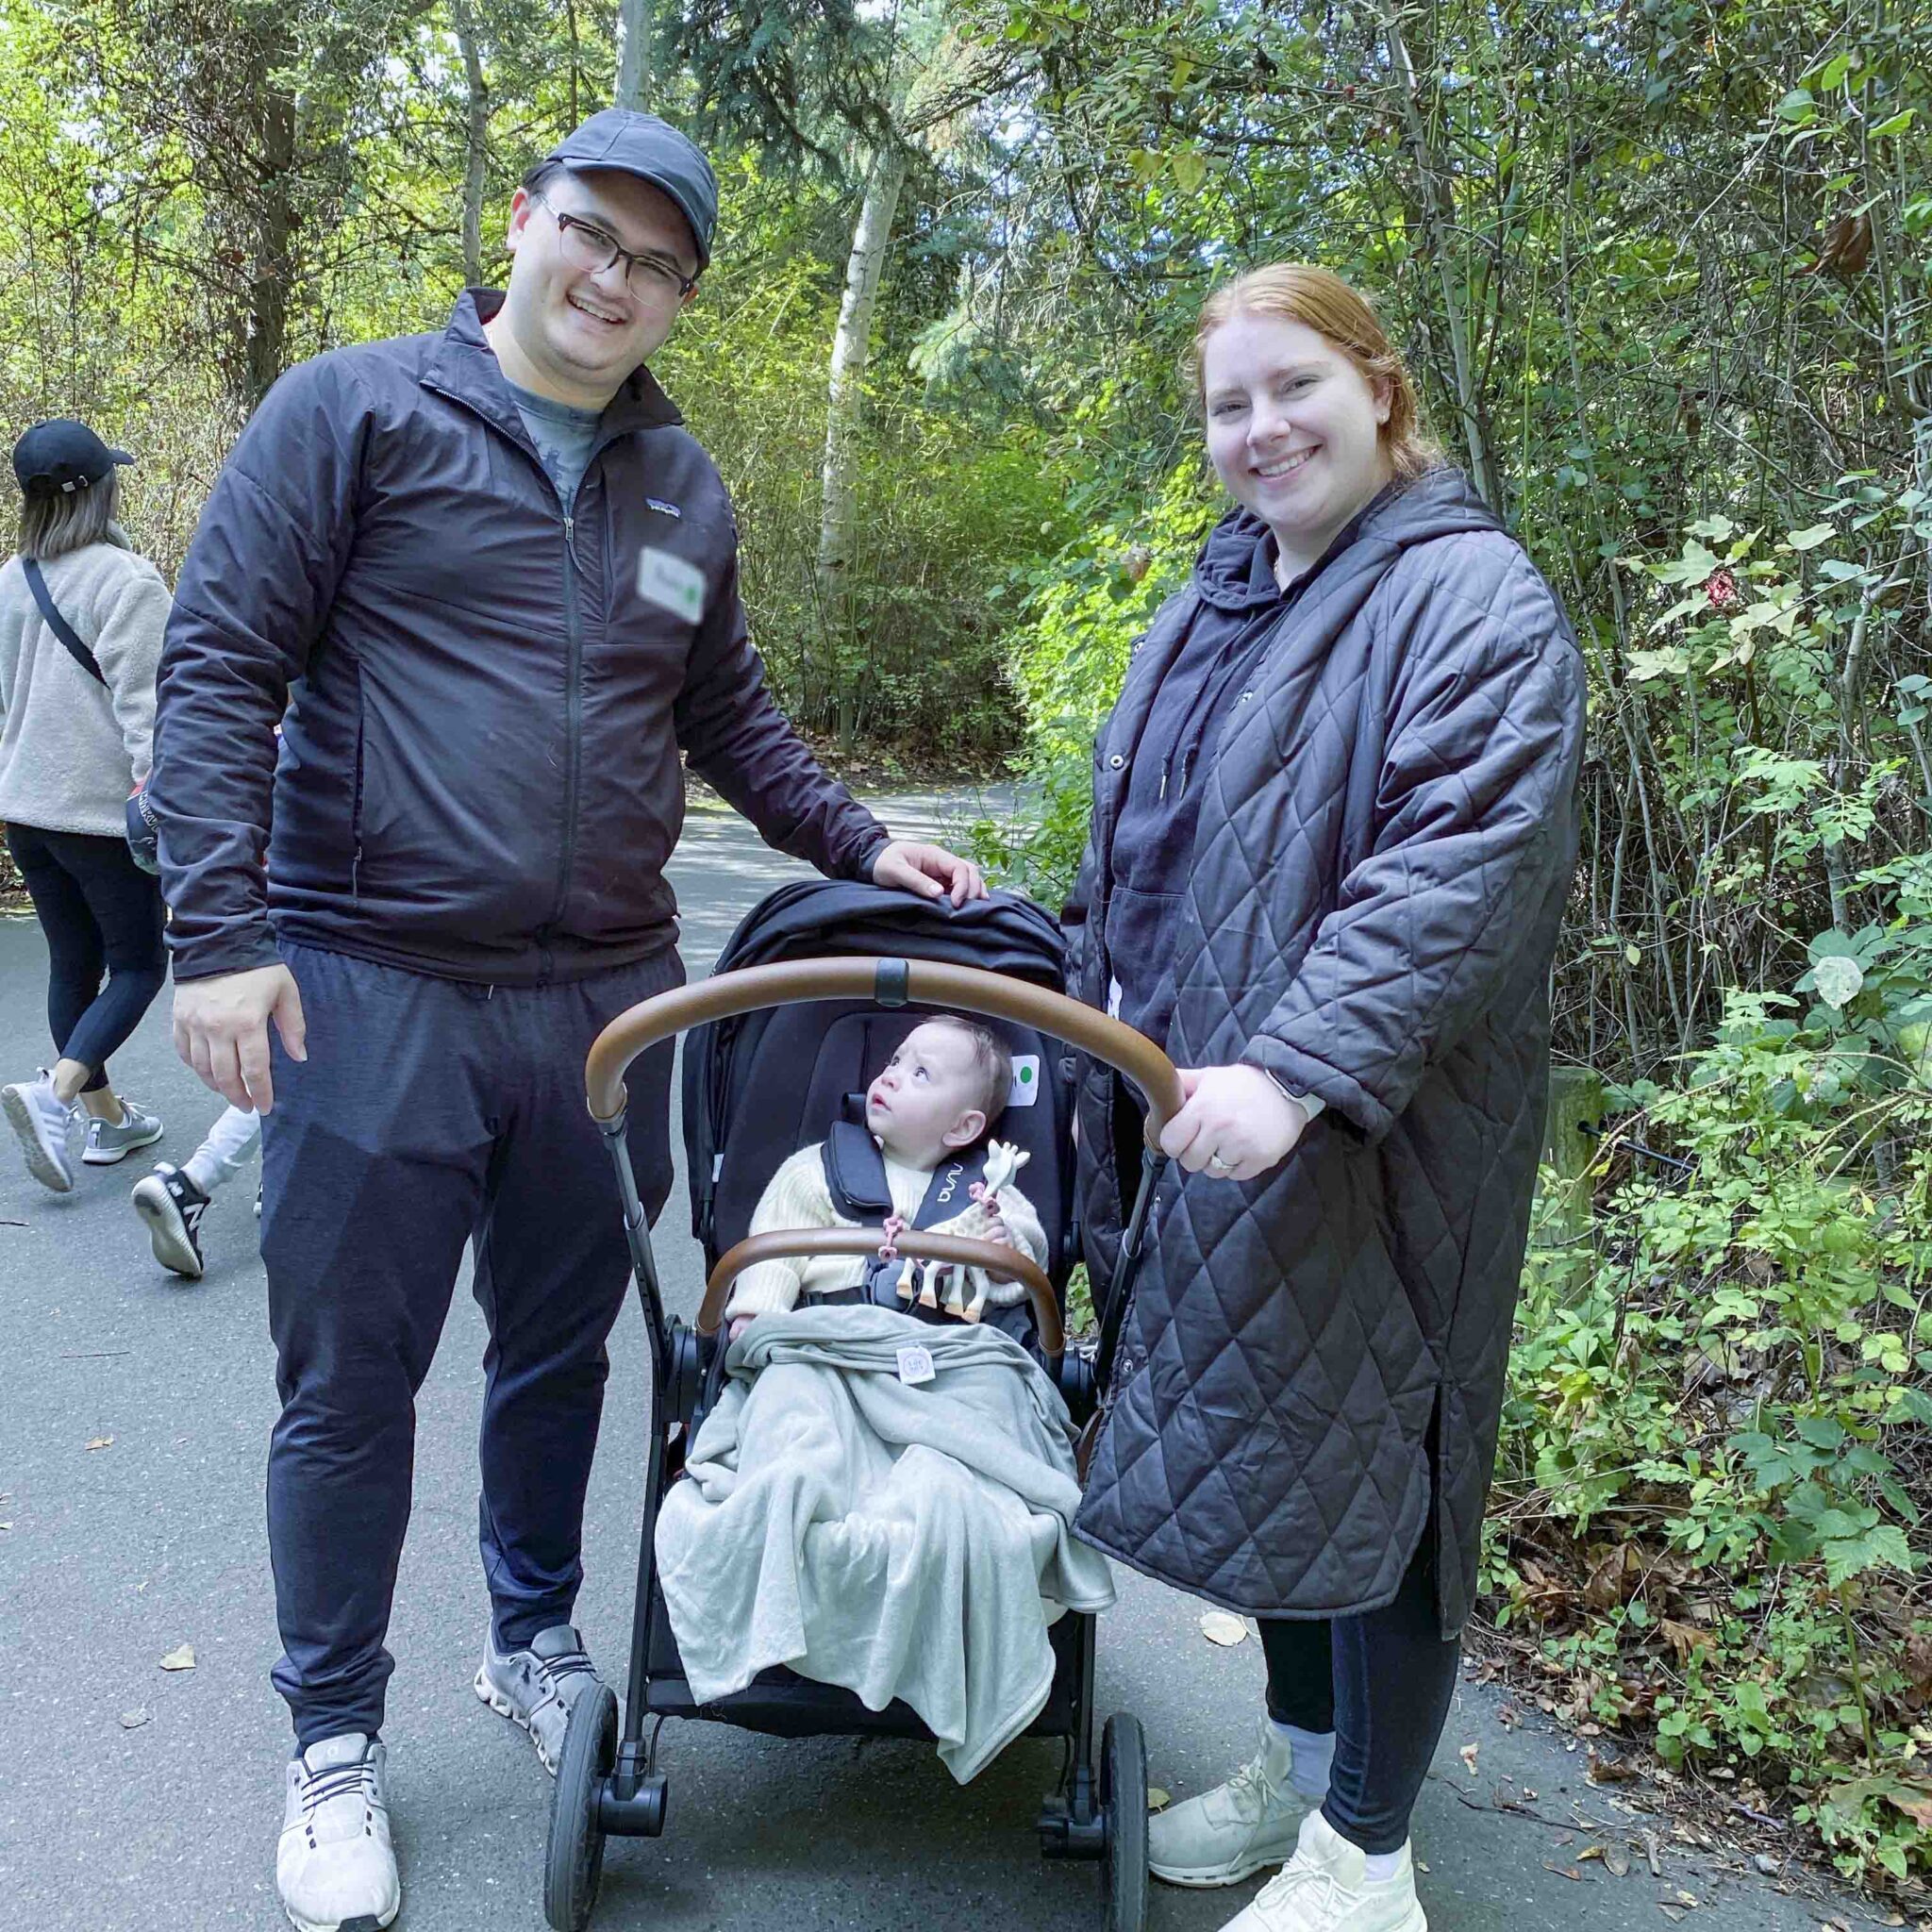 Family group photo of two adults and one child sitting in a stroller looking up at their father as they're walking on a paved pathway in the woods at the zoo.